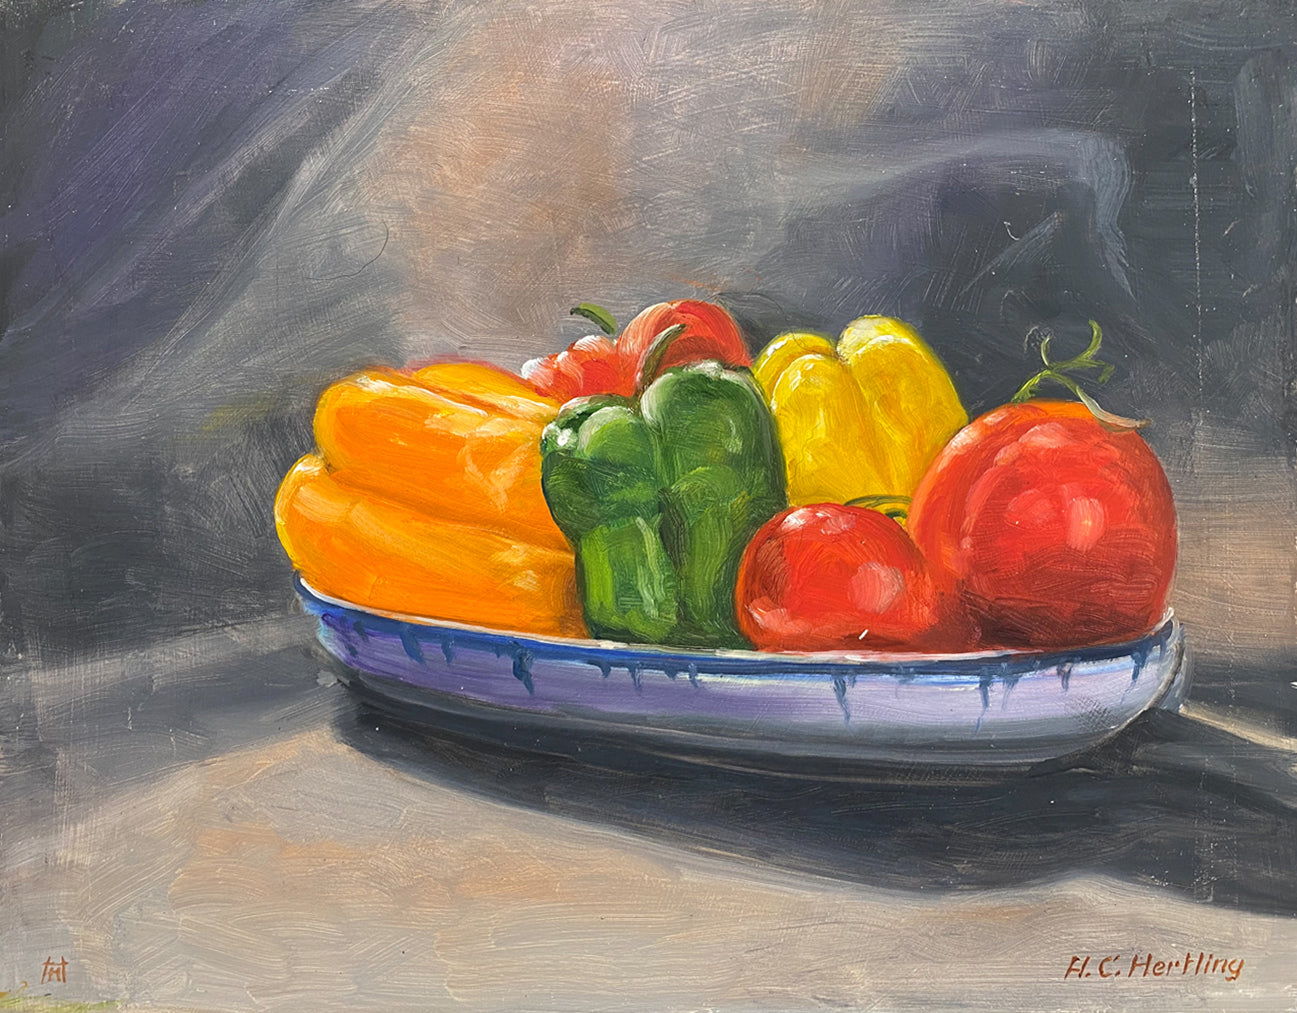 Peppers. Still life painting by Heiner Hertling.  Oil on board.  